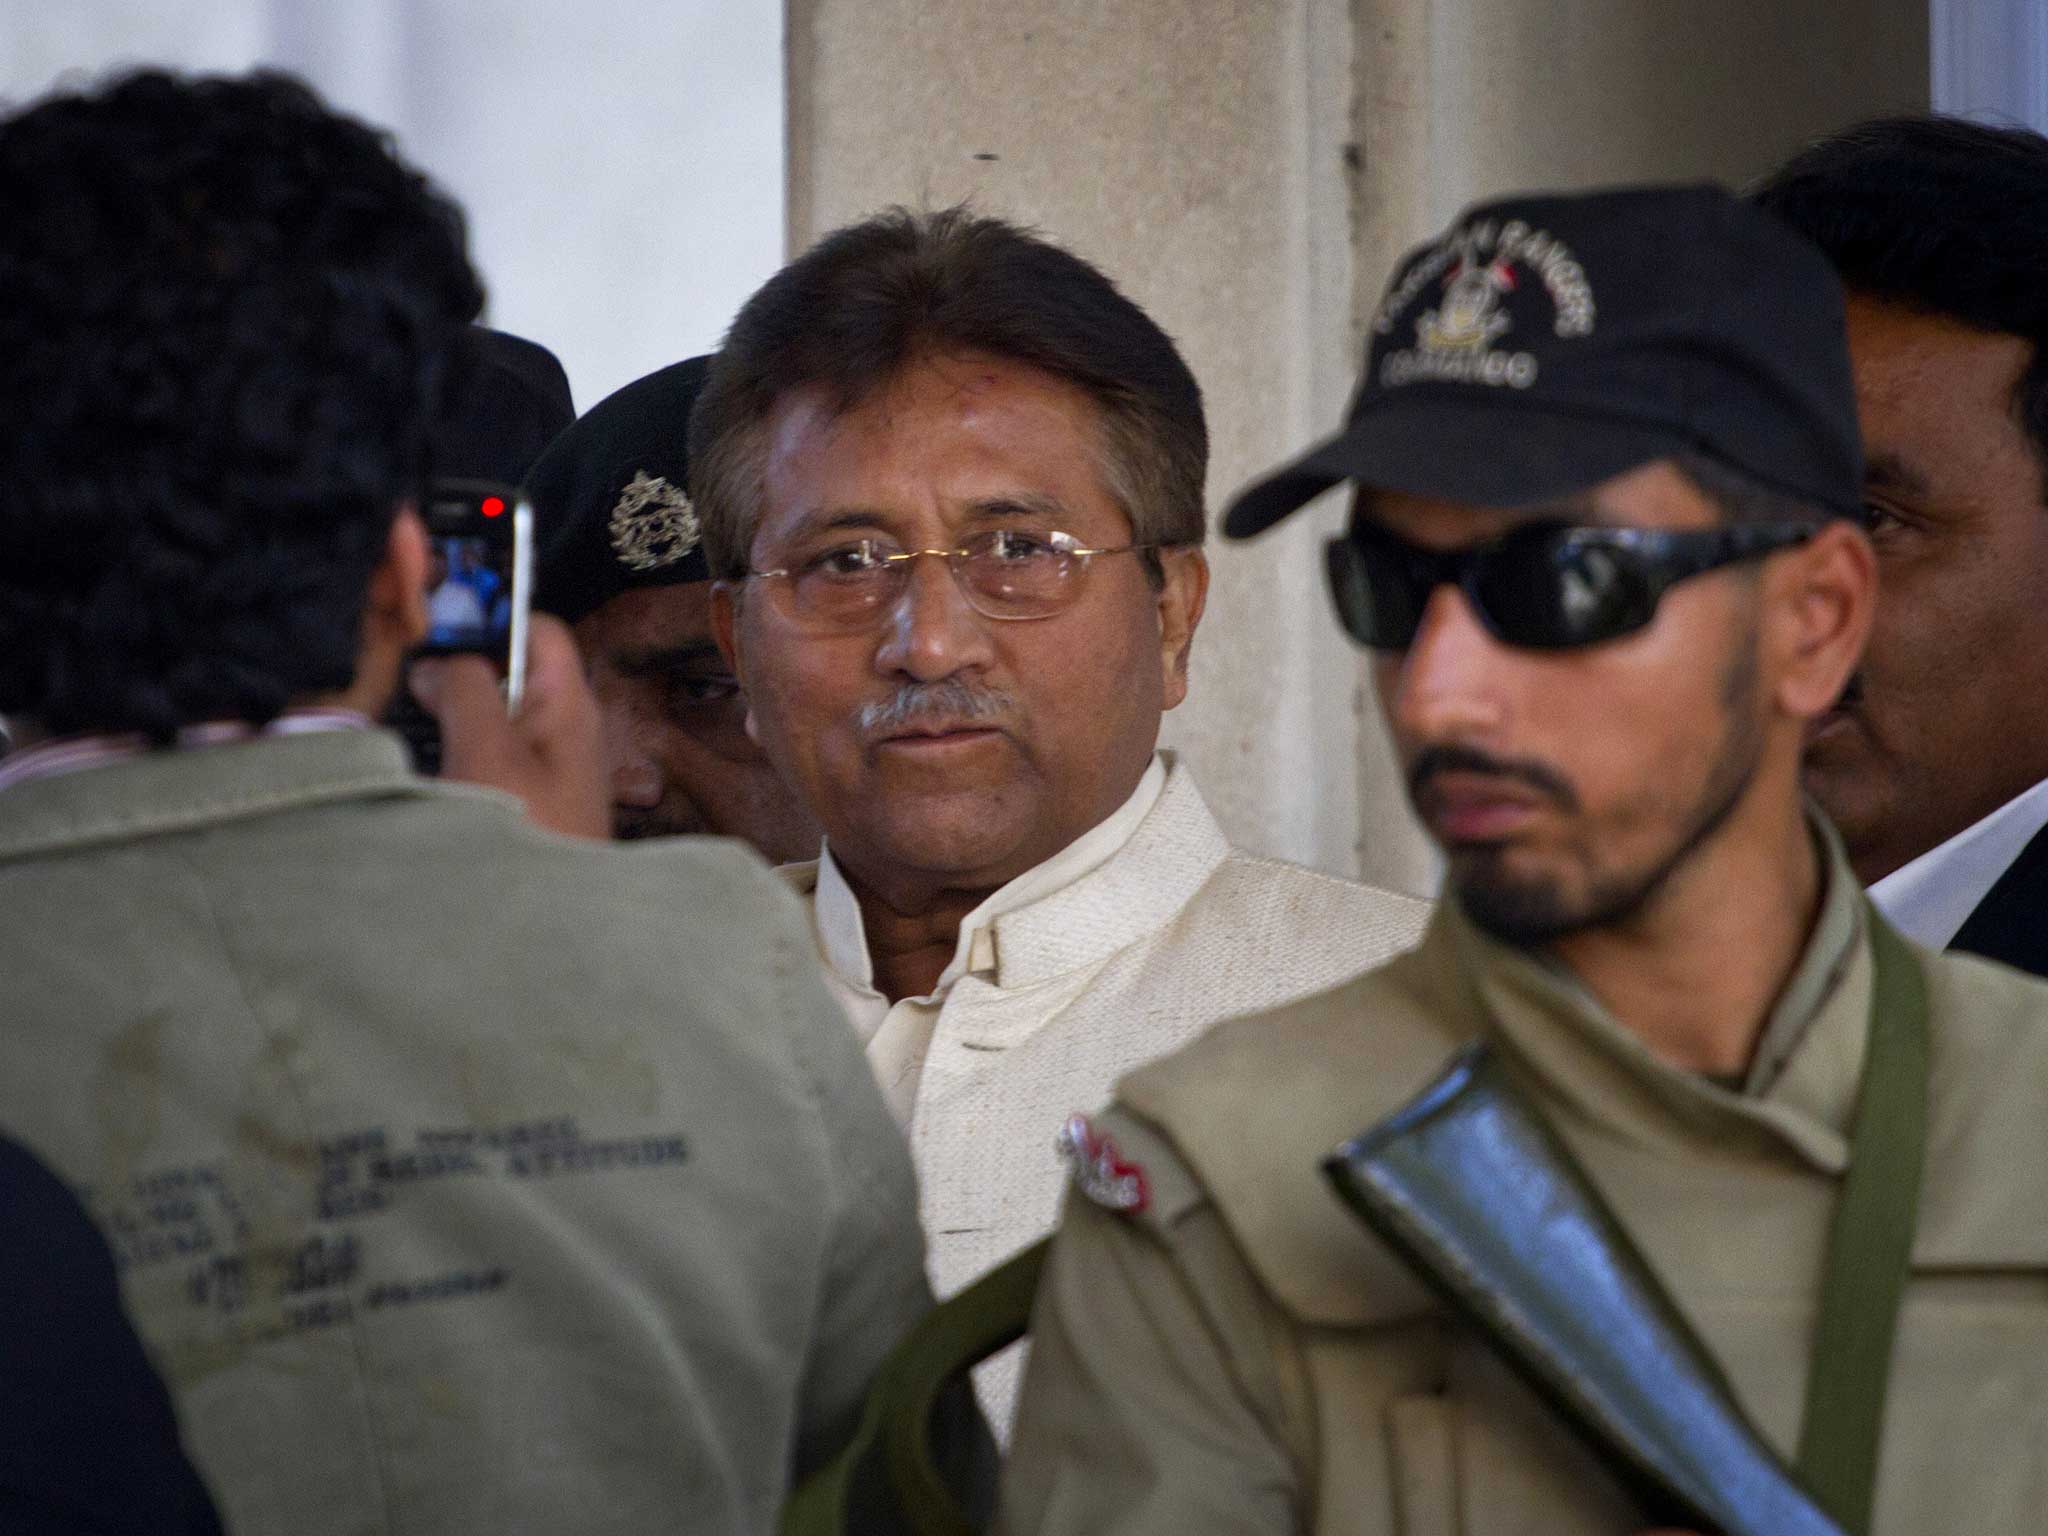 Pakistan's former president and military ruler Pervez Musharraf was arrested by police and taken before a judge